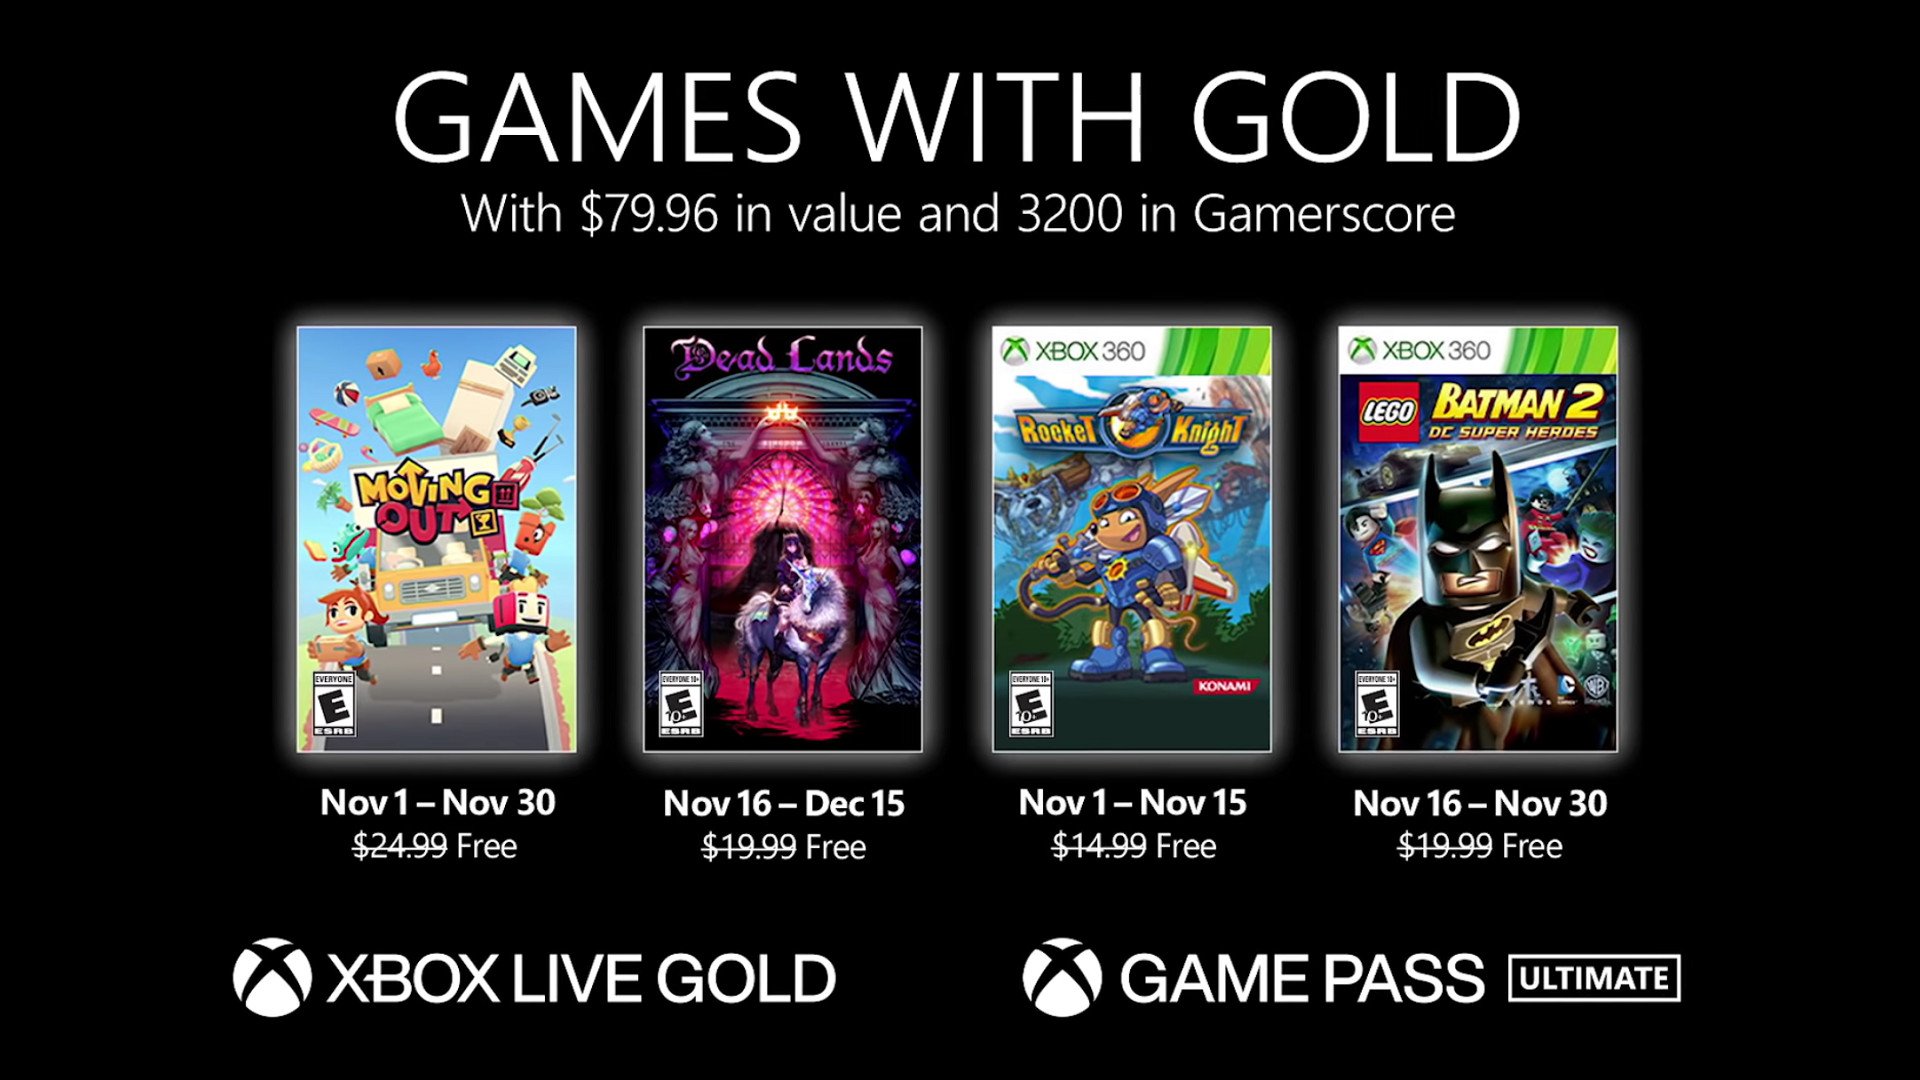 Xbox Games with Gold for November includes Moving Out, Kingdom Two